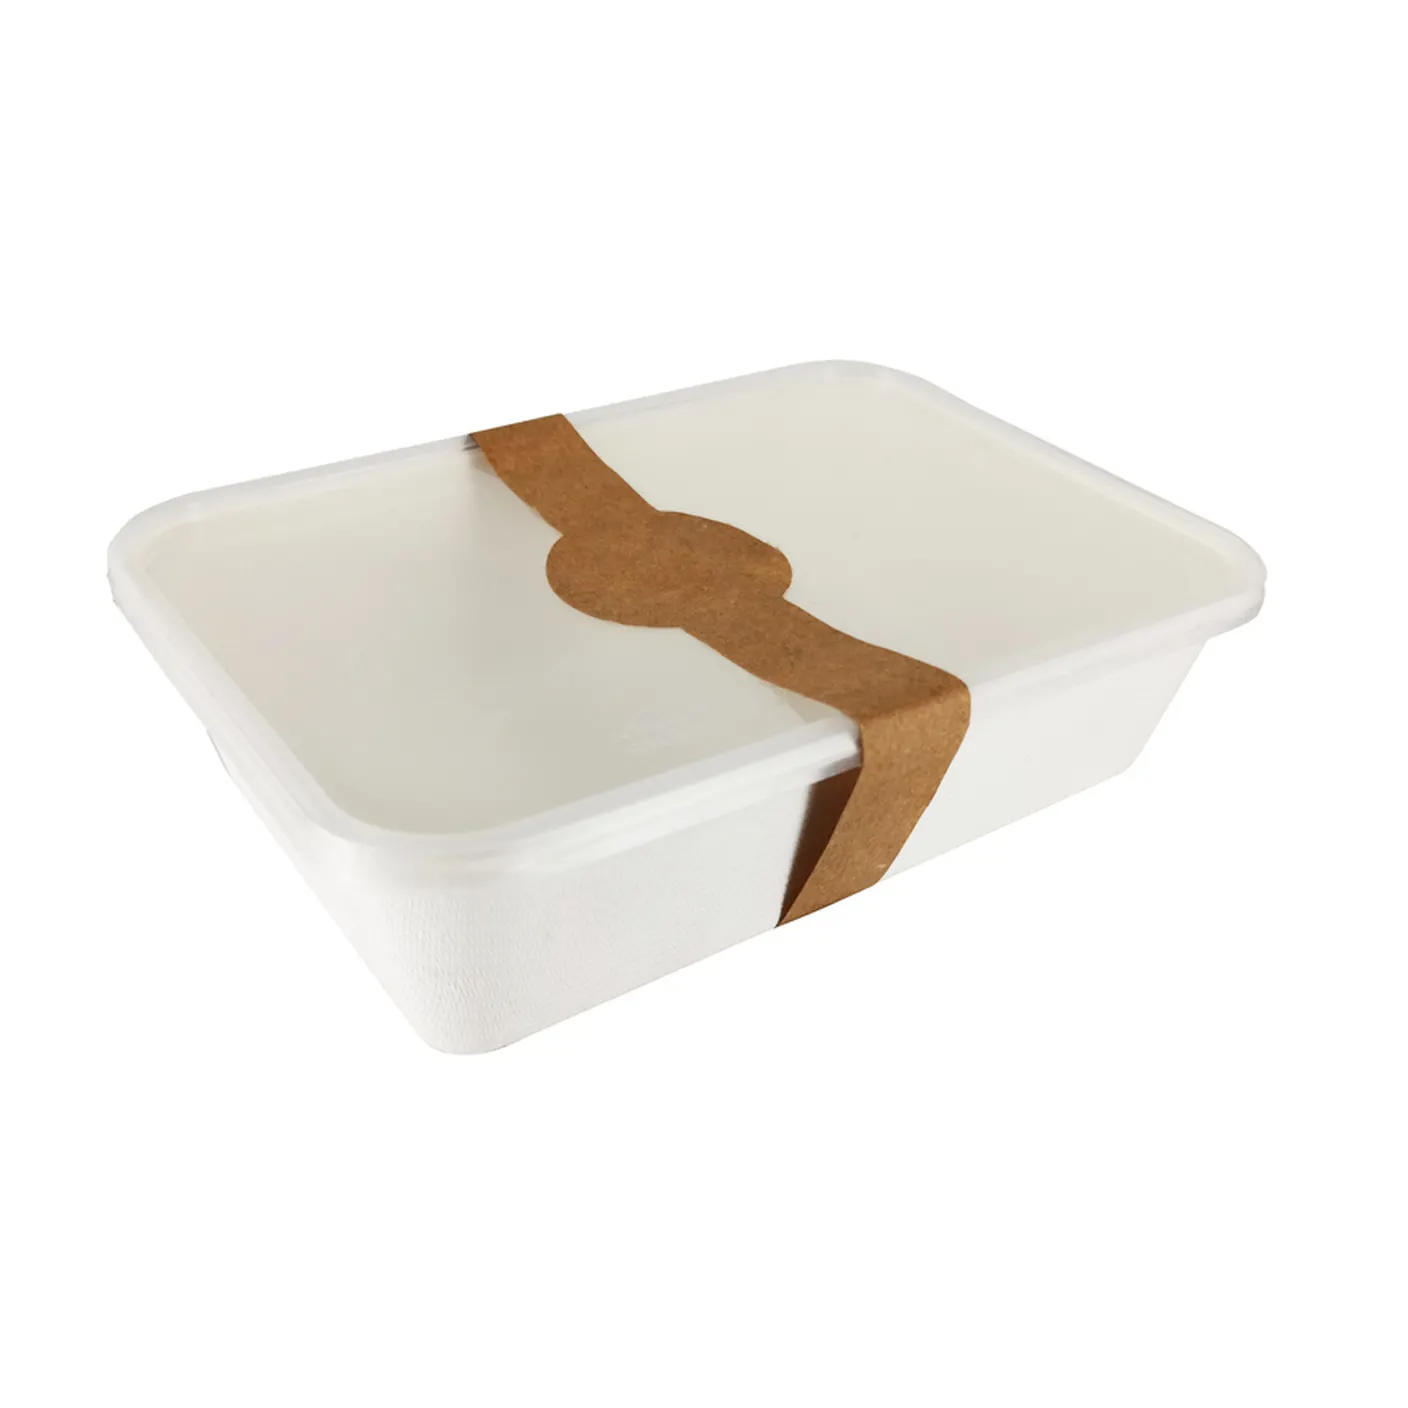 Take Out - Disposable Lunch Sets - BioandChic